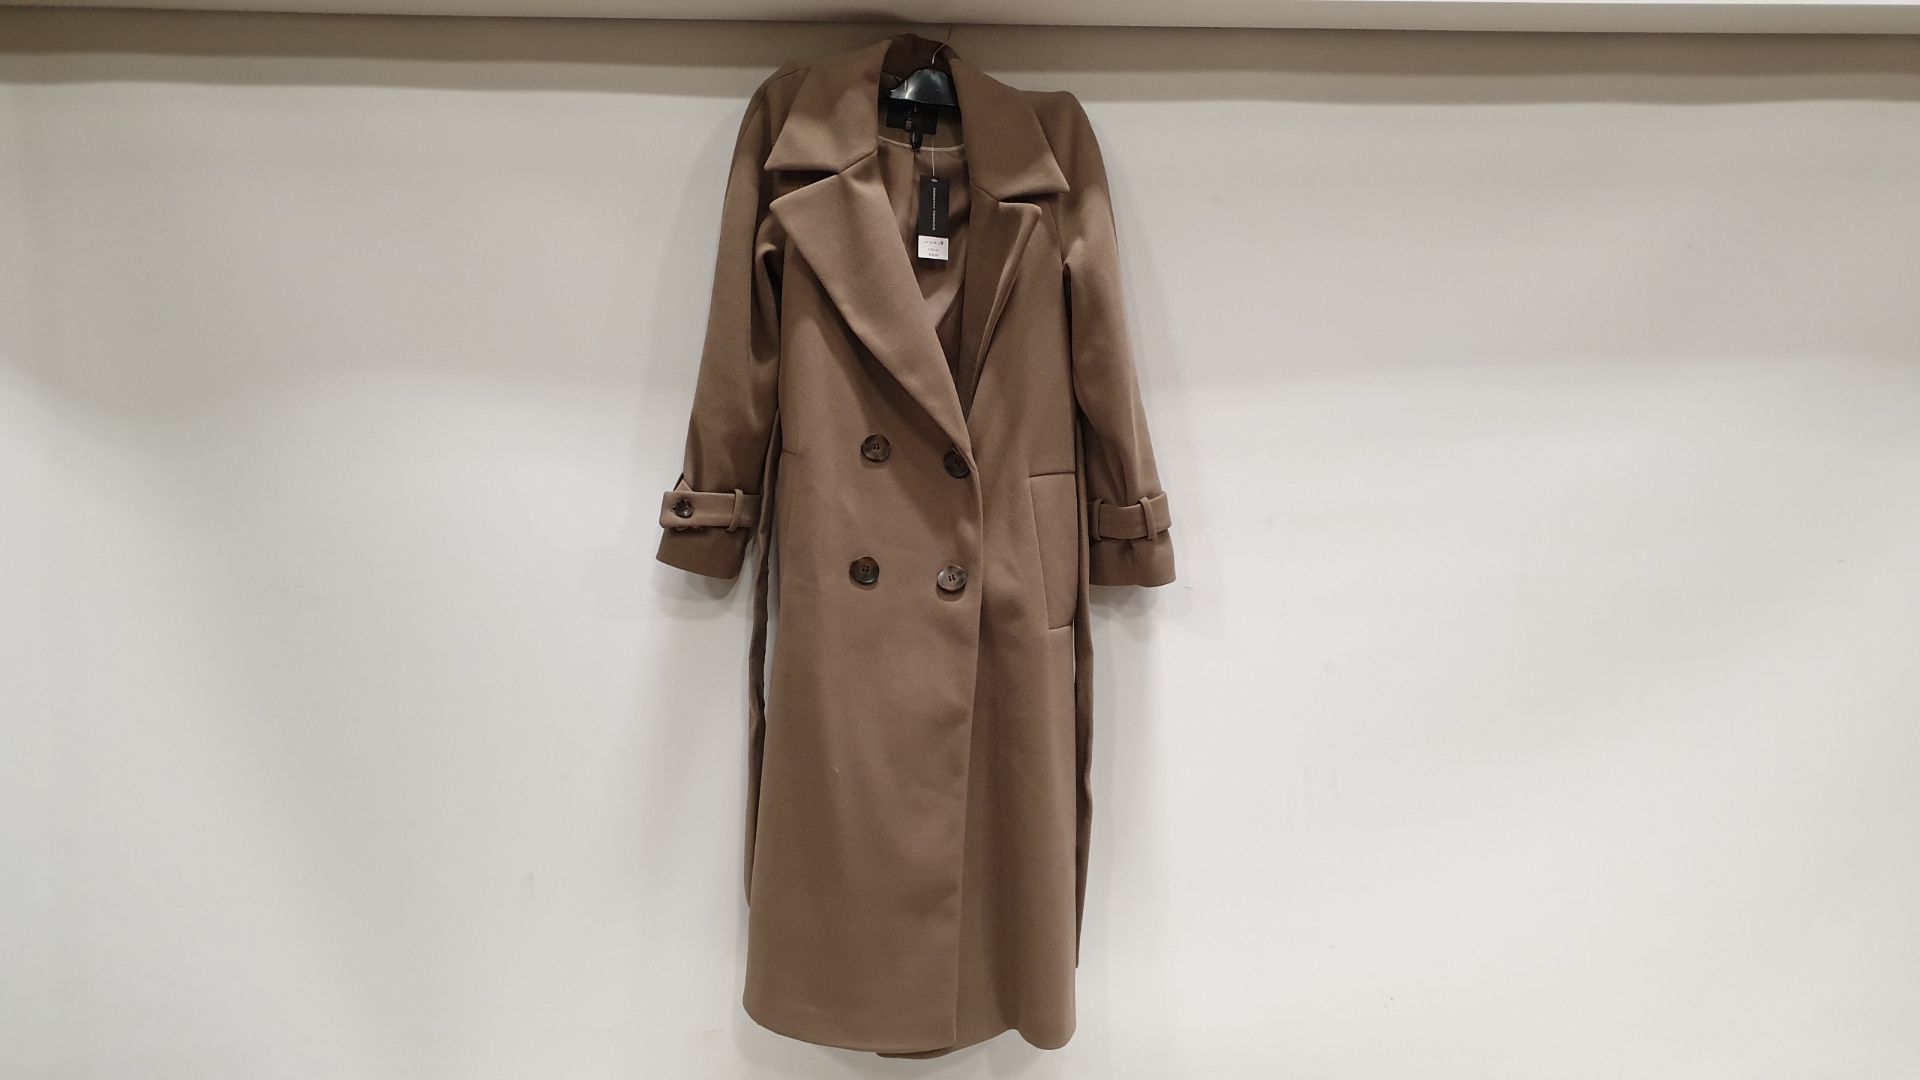 14 X BRAND NEW DOROTHY PERKINS TRENCH COAT UK SIZE 16 TOTAL RRP £1050.00